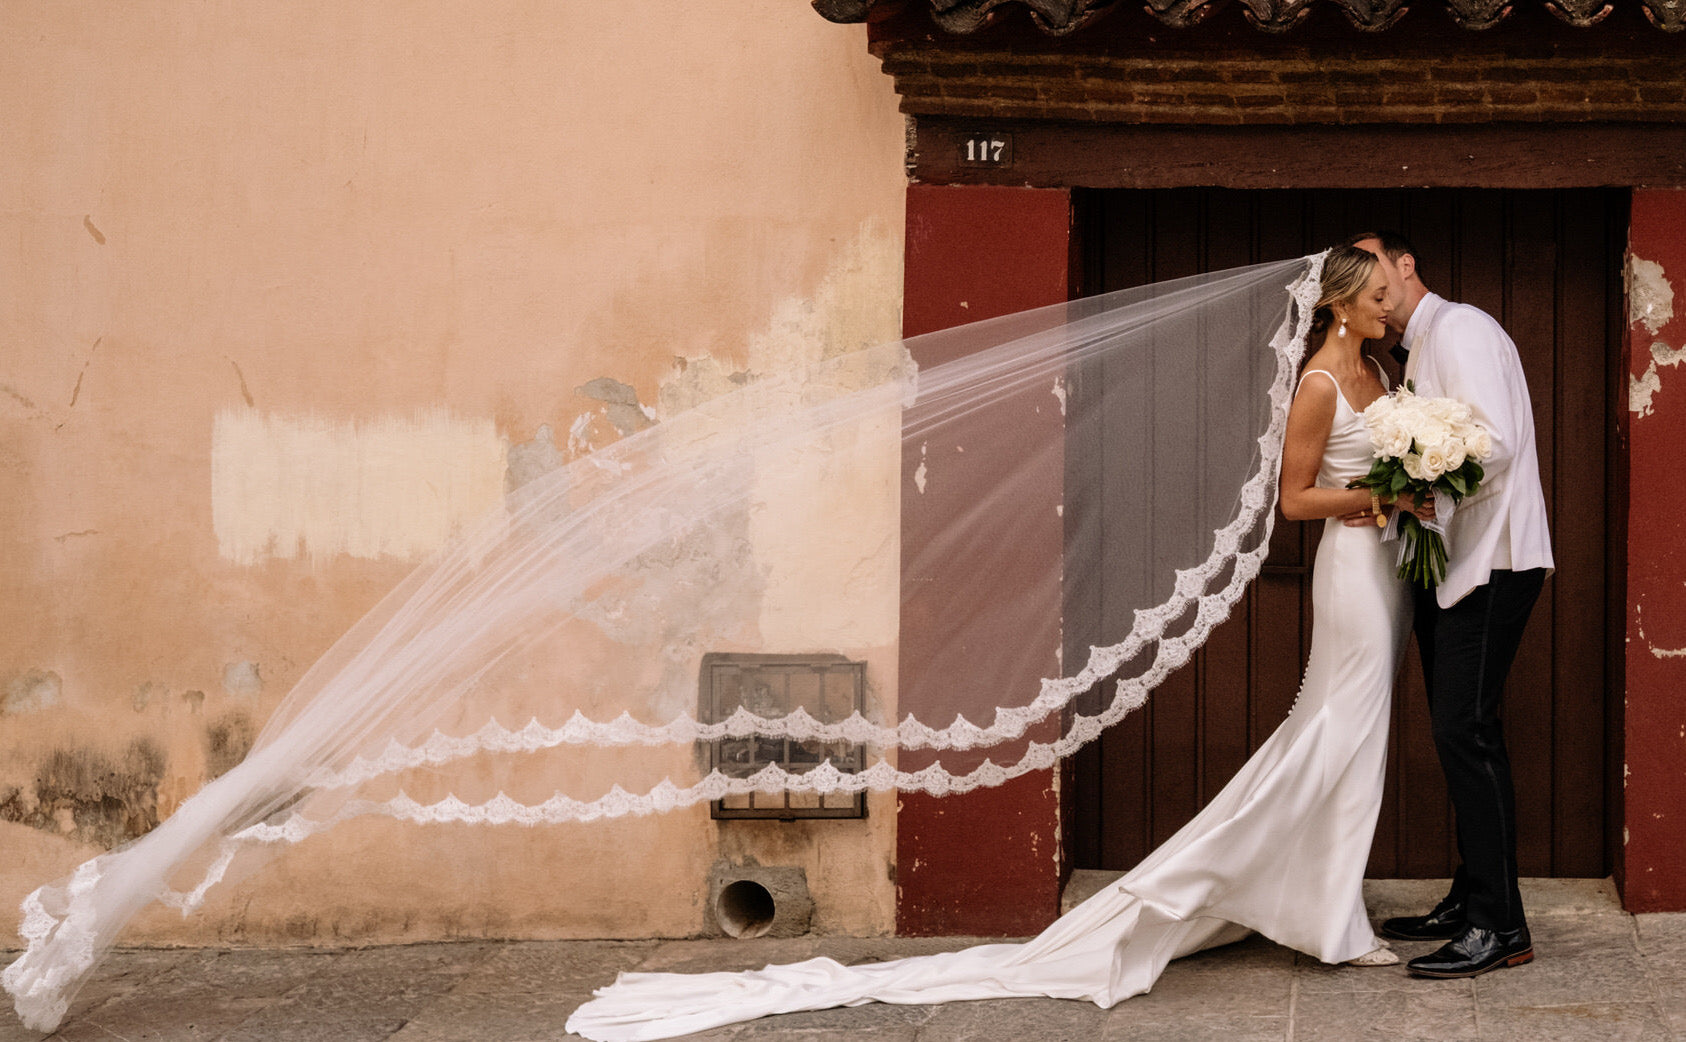 Spanish style mantilla eyelash lace royal length wedding veil on bride and groom in Spanish doorway with veil blowing